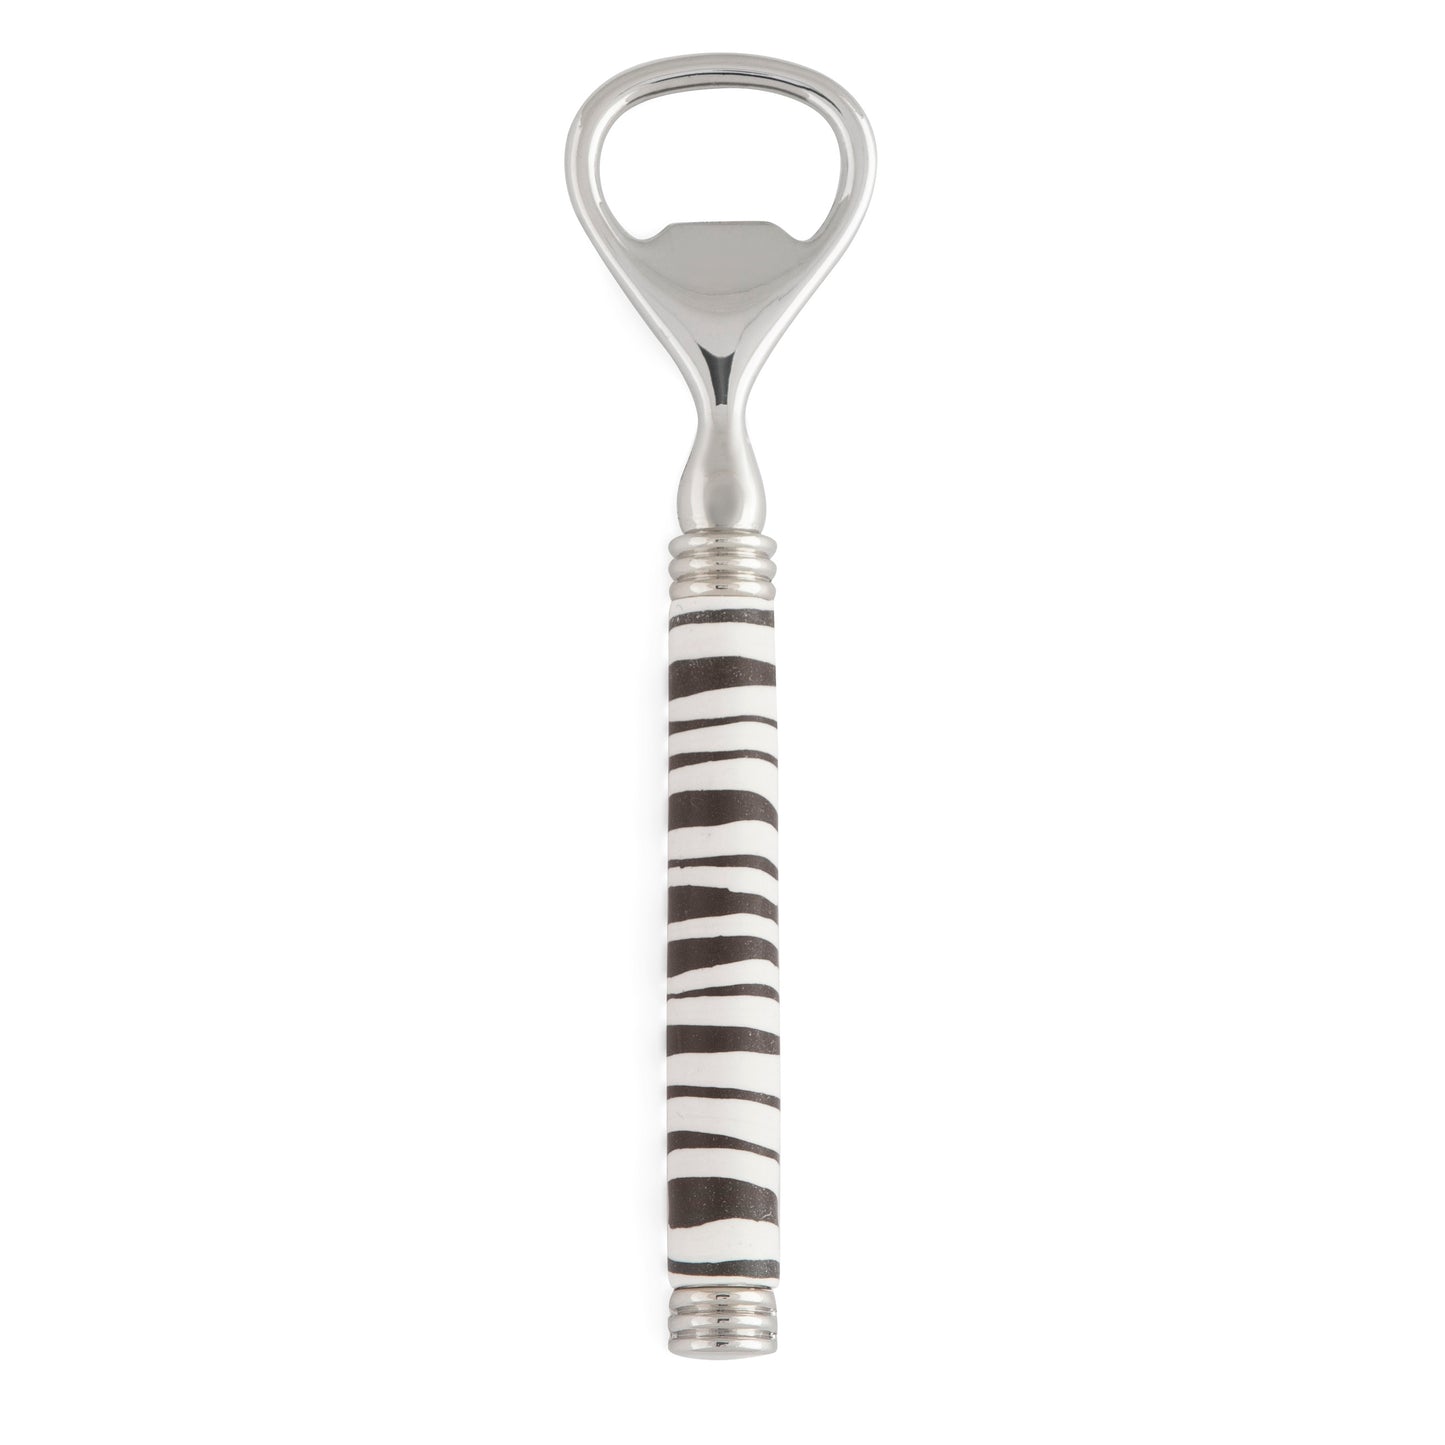 Fimo clay and silver-plated bottle opener in a wooden gift box